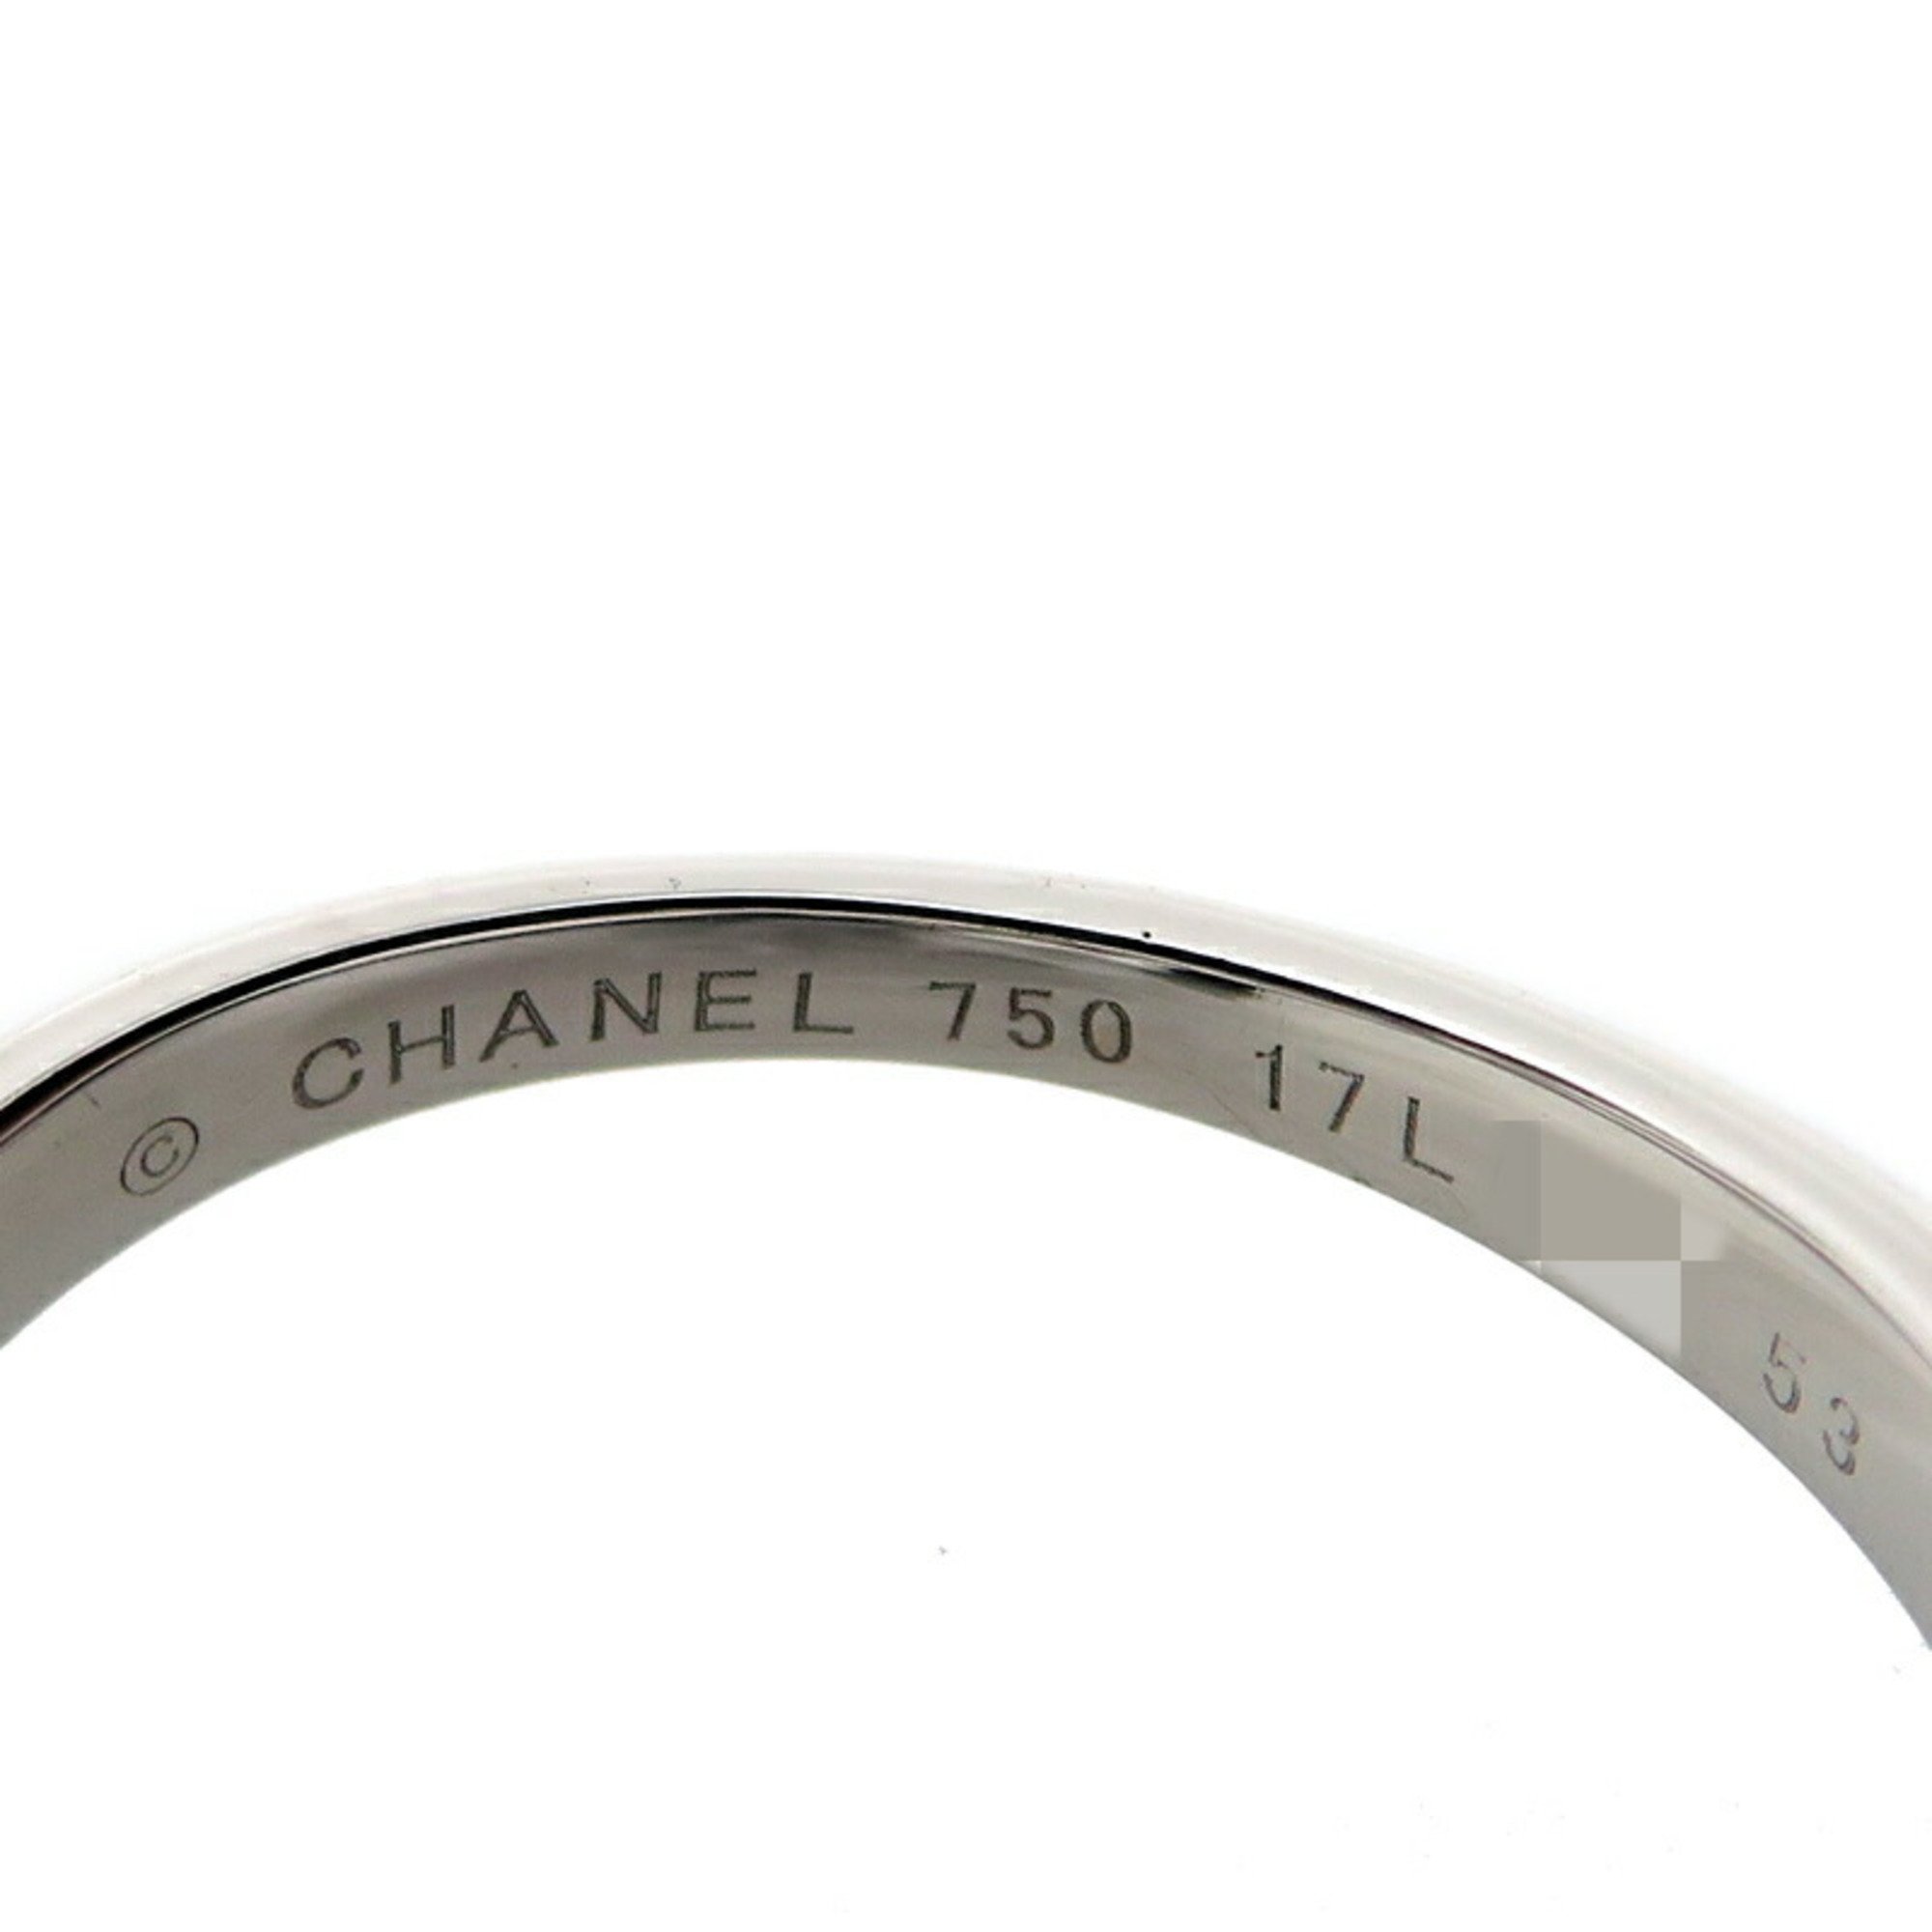 Chanel #53 Mademoiselle Women's Ring 750 White Gold No. 11 Multicolor